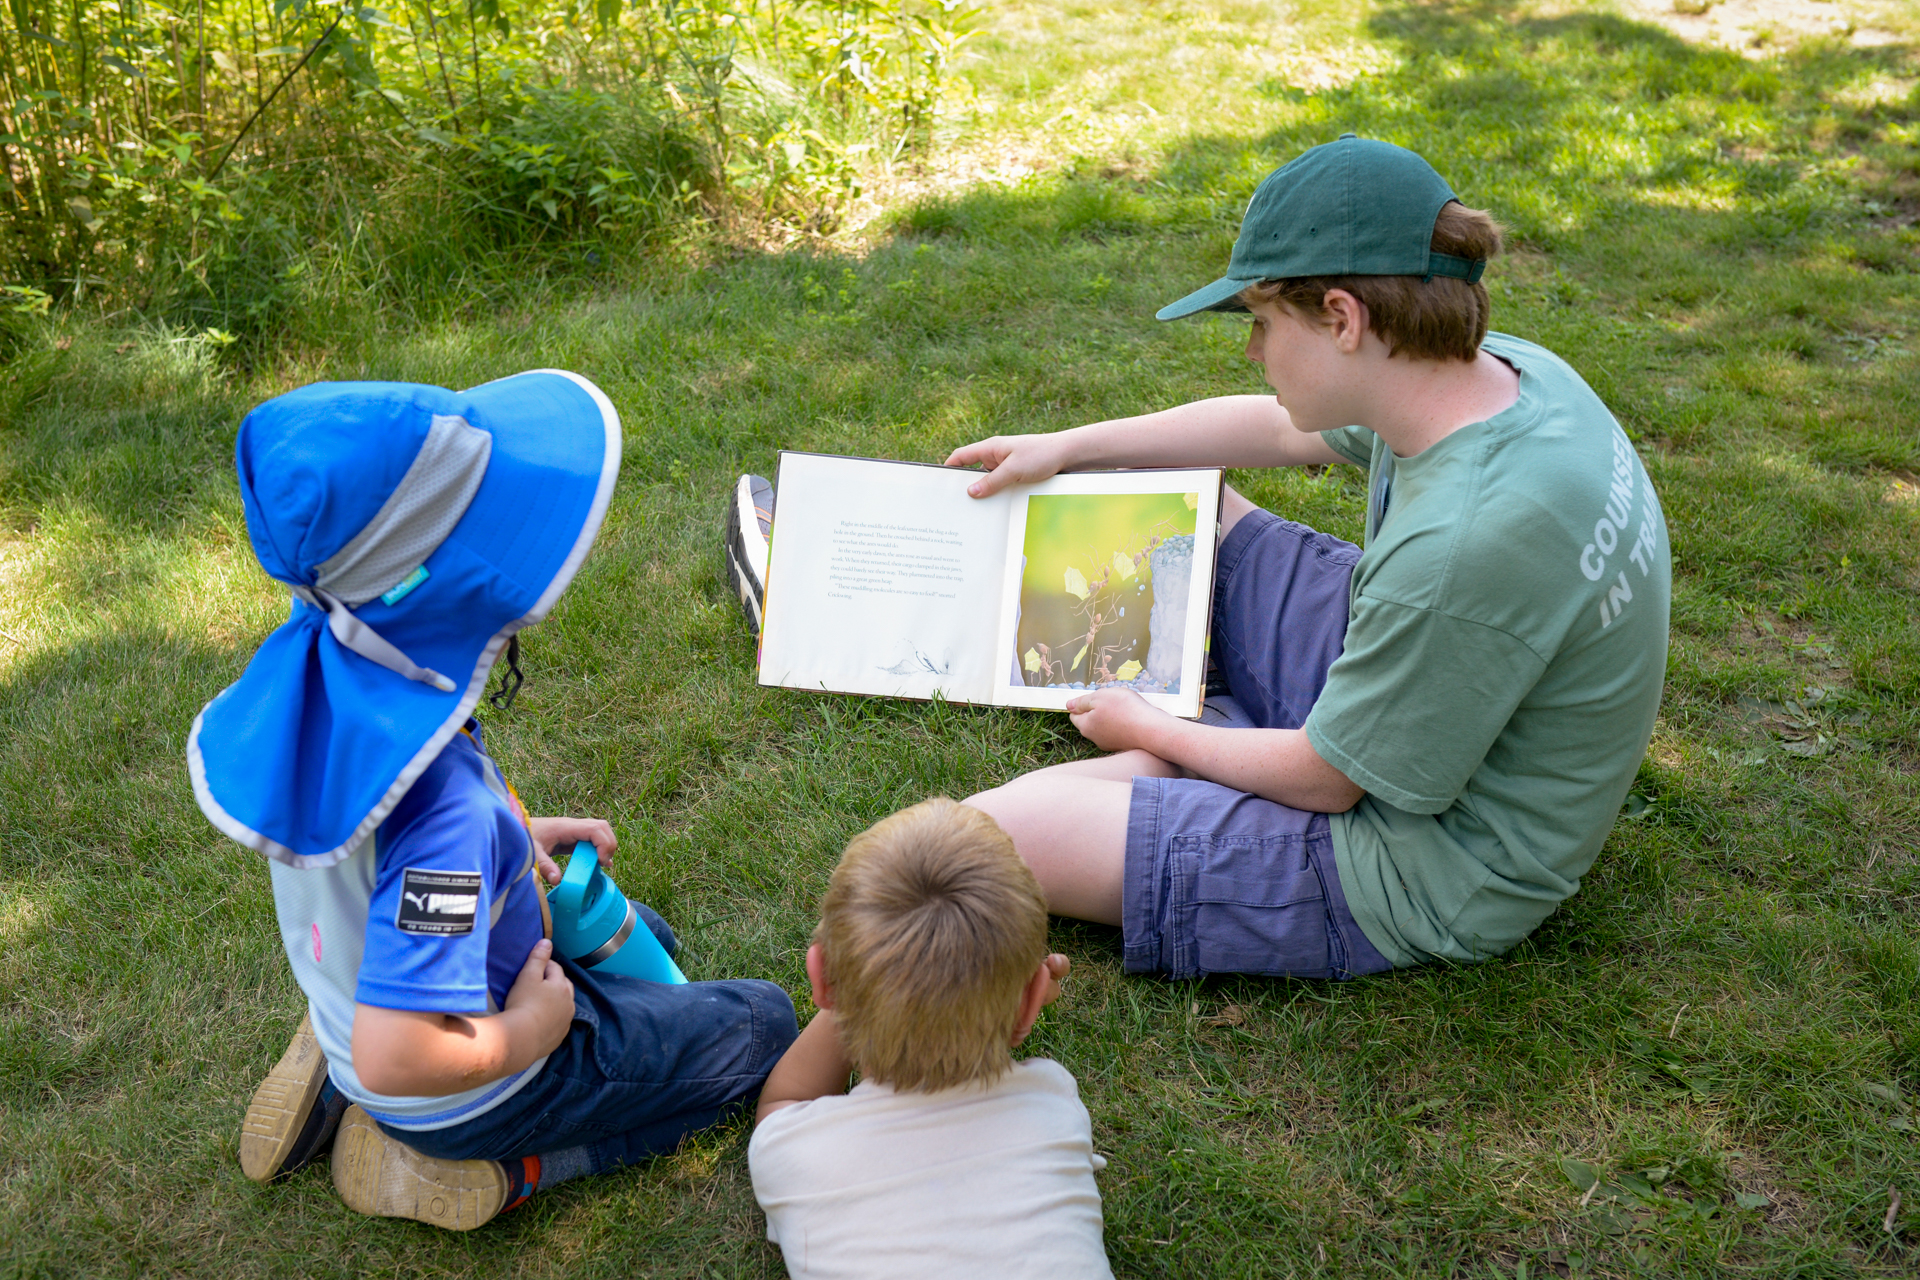 A CIT at Broadmoor Nature Camp reads a picture book to two campers seated on the grass in the shade